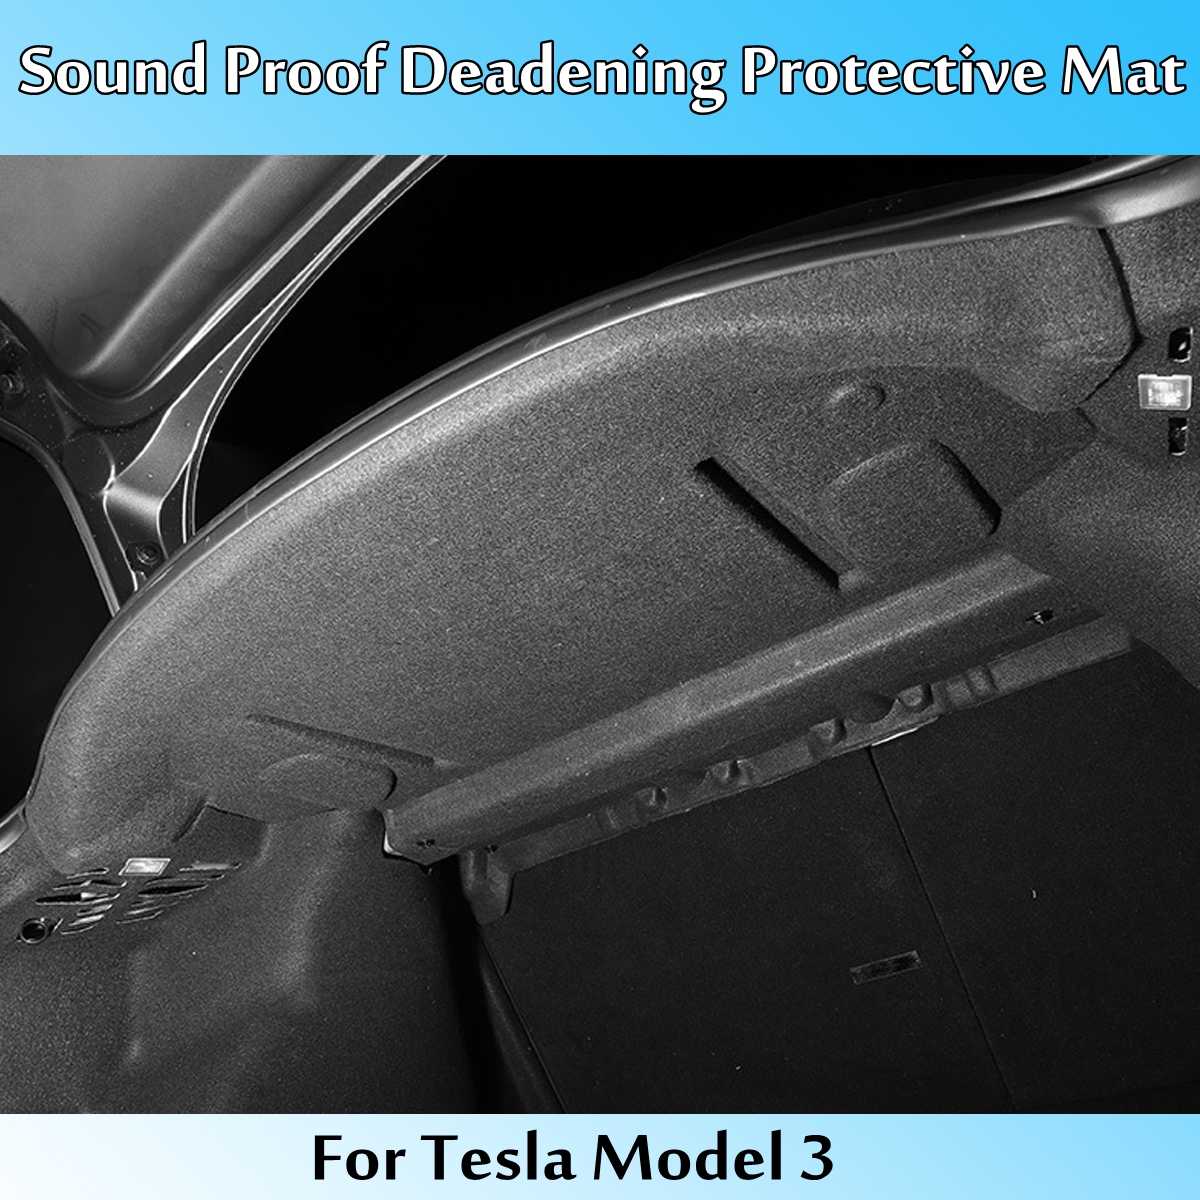 Car Rear Trunk Soundproof Cotton Mat Sound Proof Protective Pad Deadening Protective Cover For Tesla Model 3 2017 2018 2019